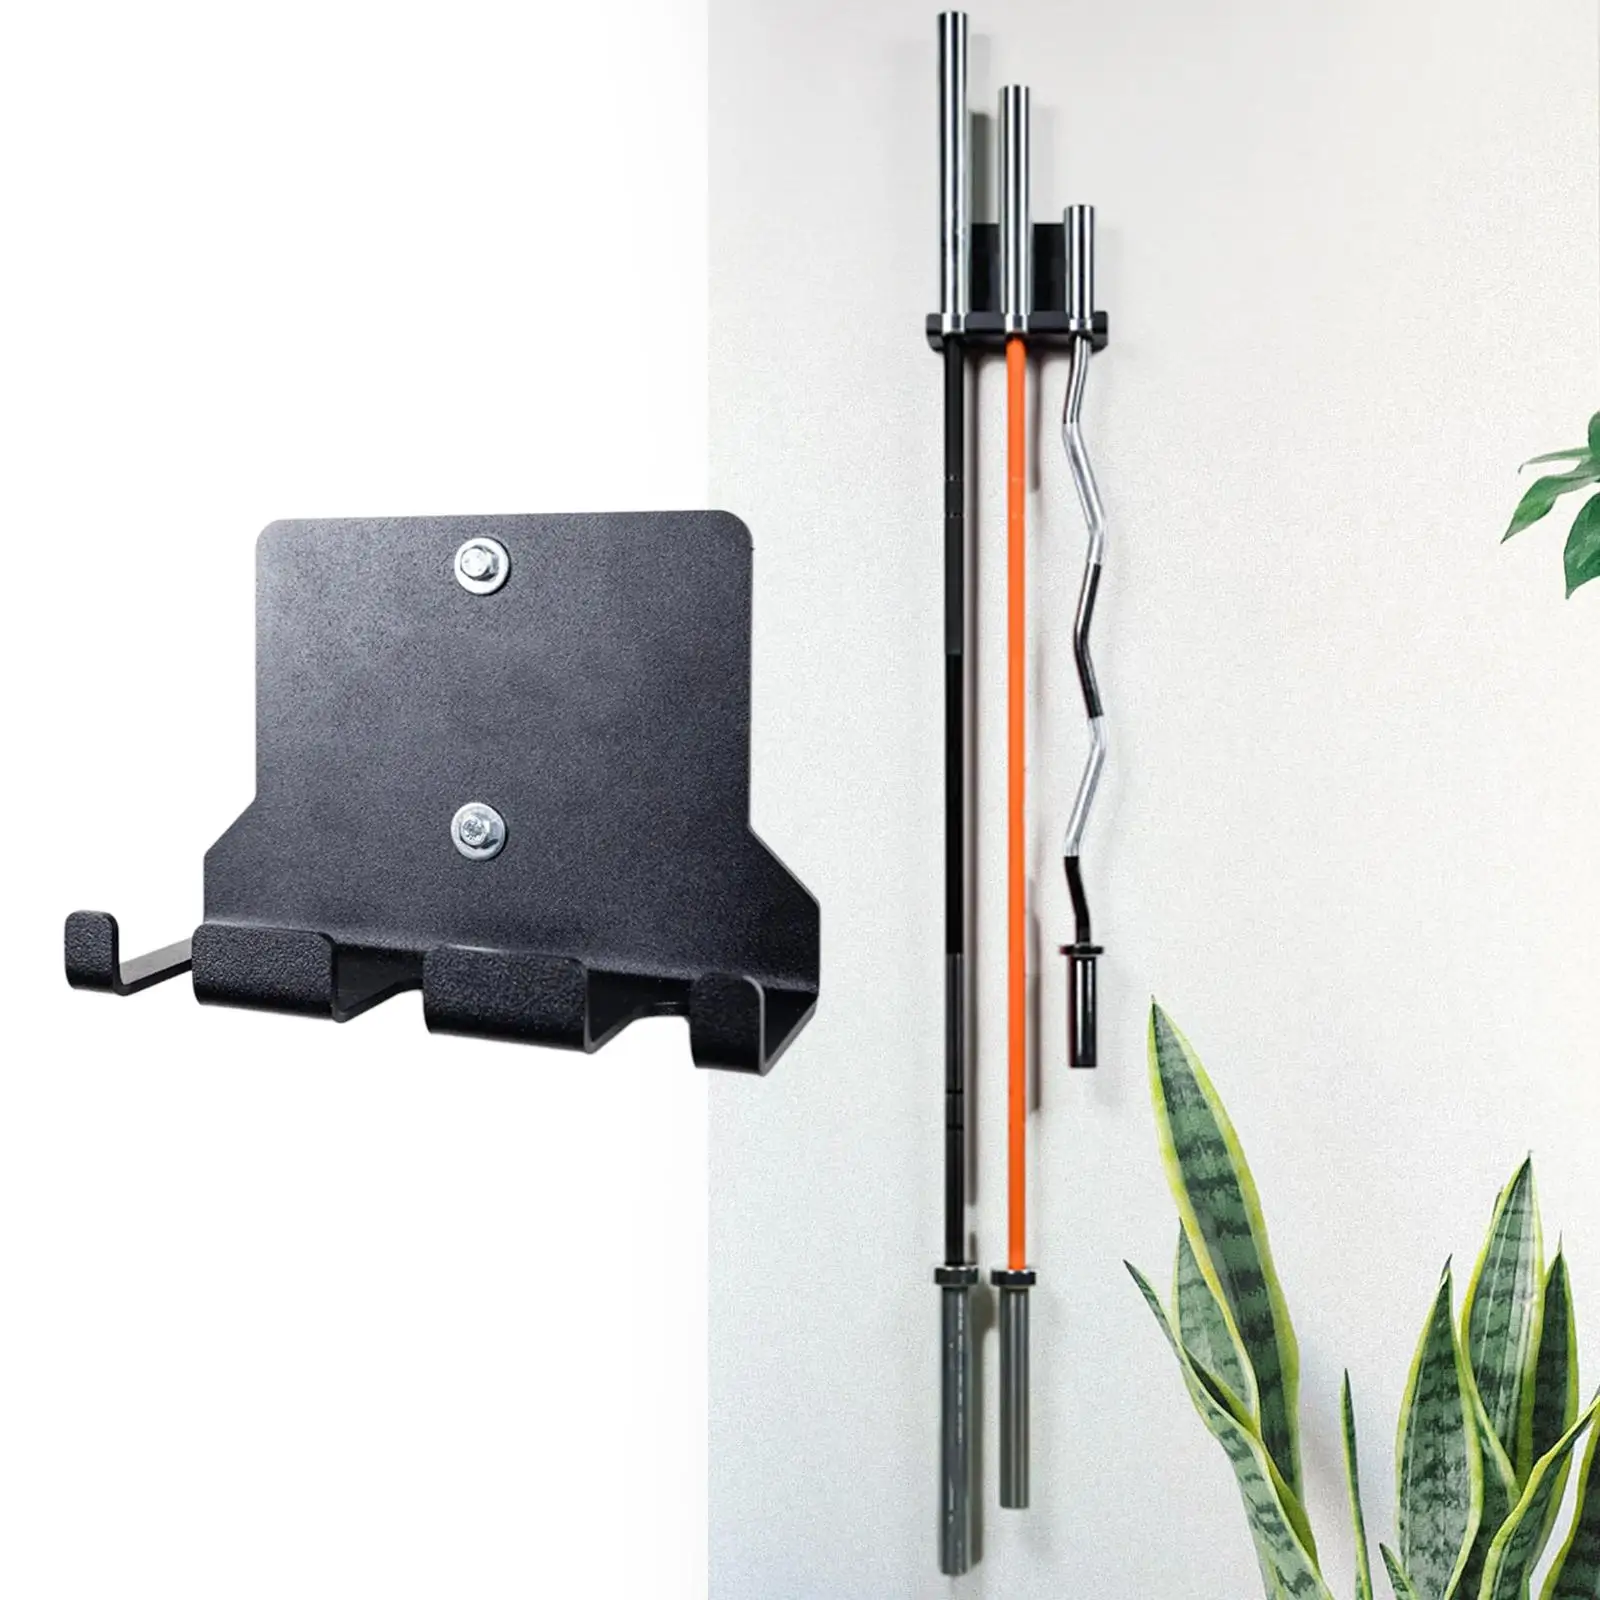 Barbell Holder Rack Display Weight Bar Holder Vertical Hanging Wall Mounted Space Saving Hanger for Home Gym Fitness Workout